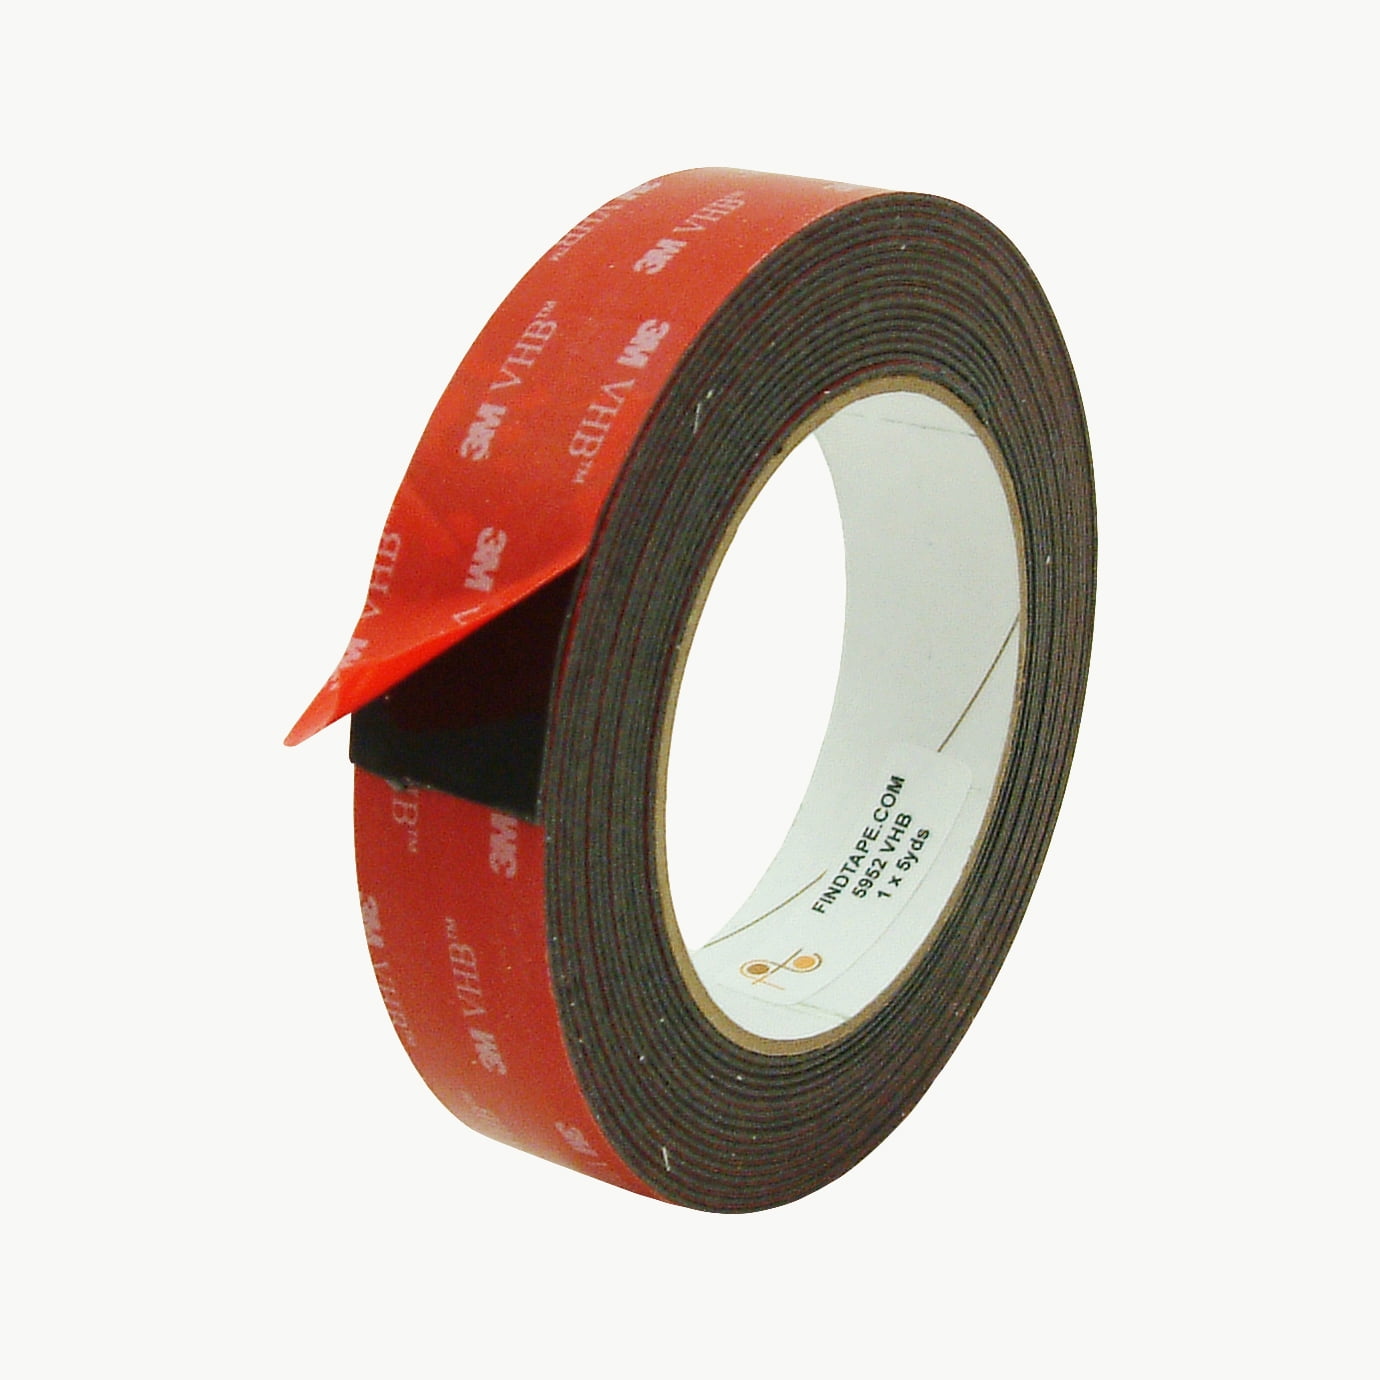 Applications of 3M VHB Tapes